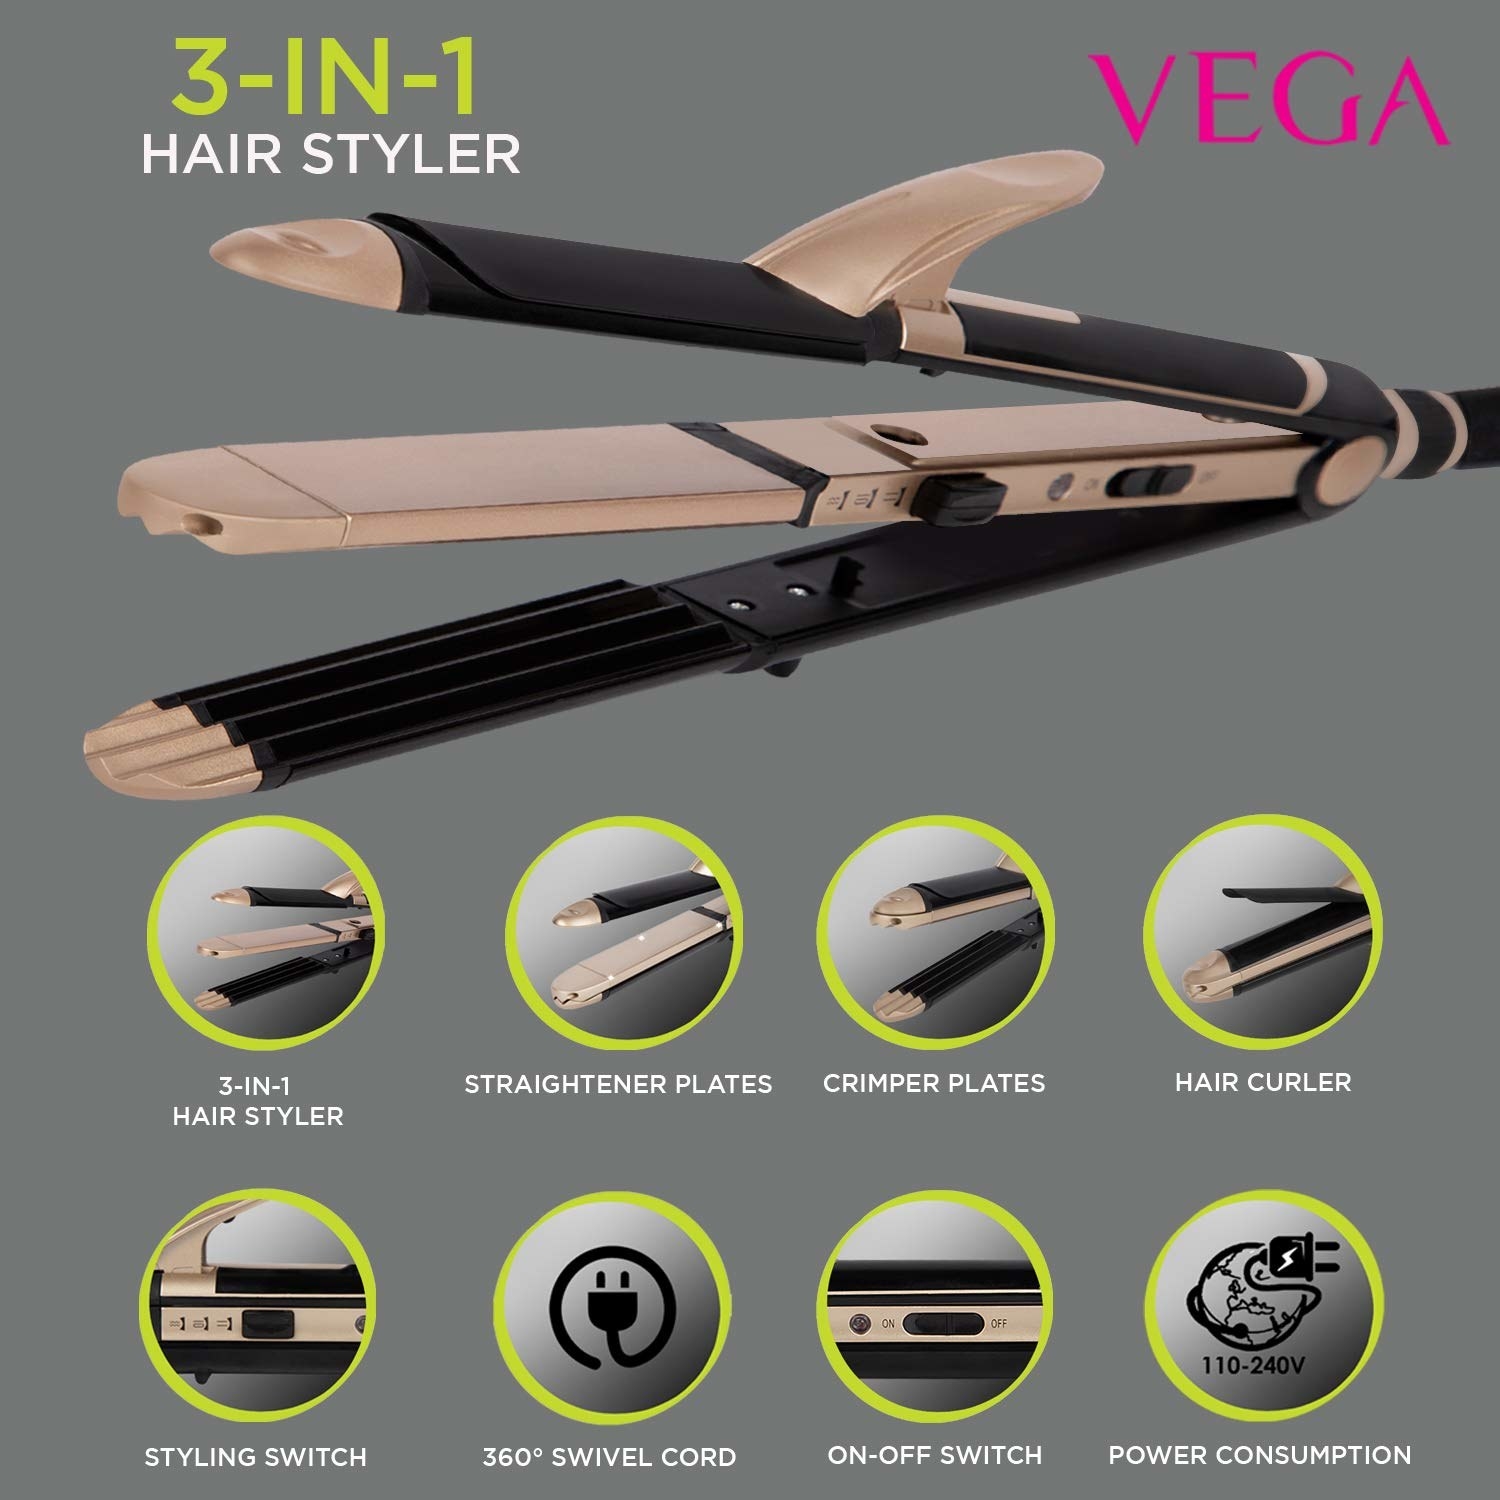 A 3-in-1 hair styler with its various uses 